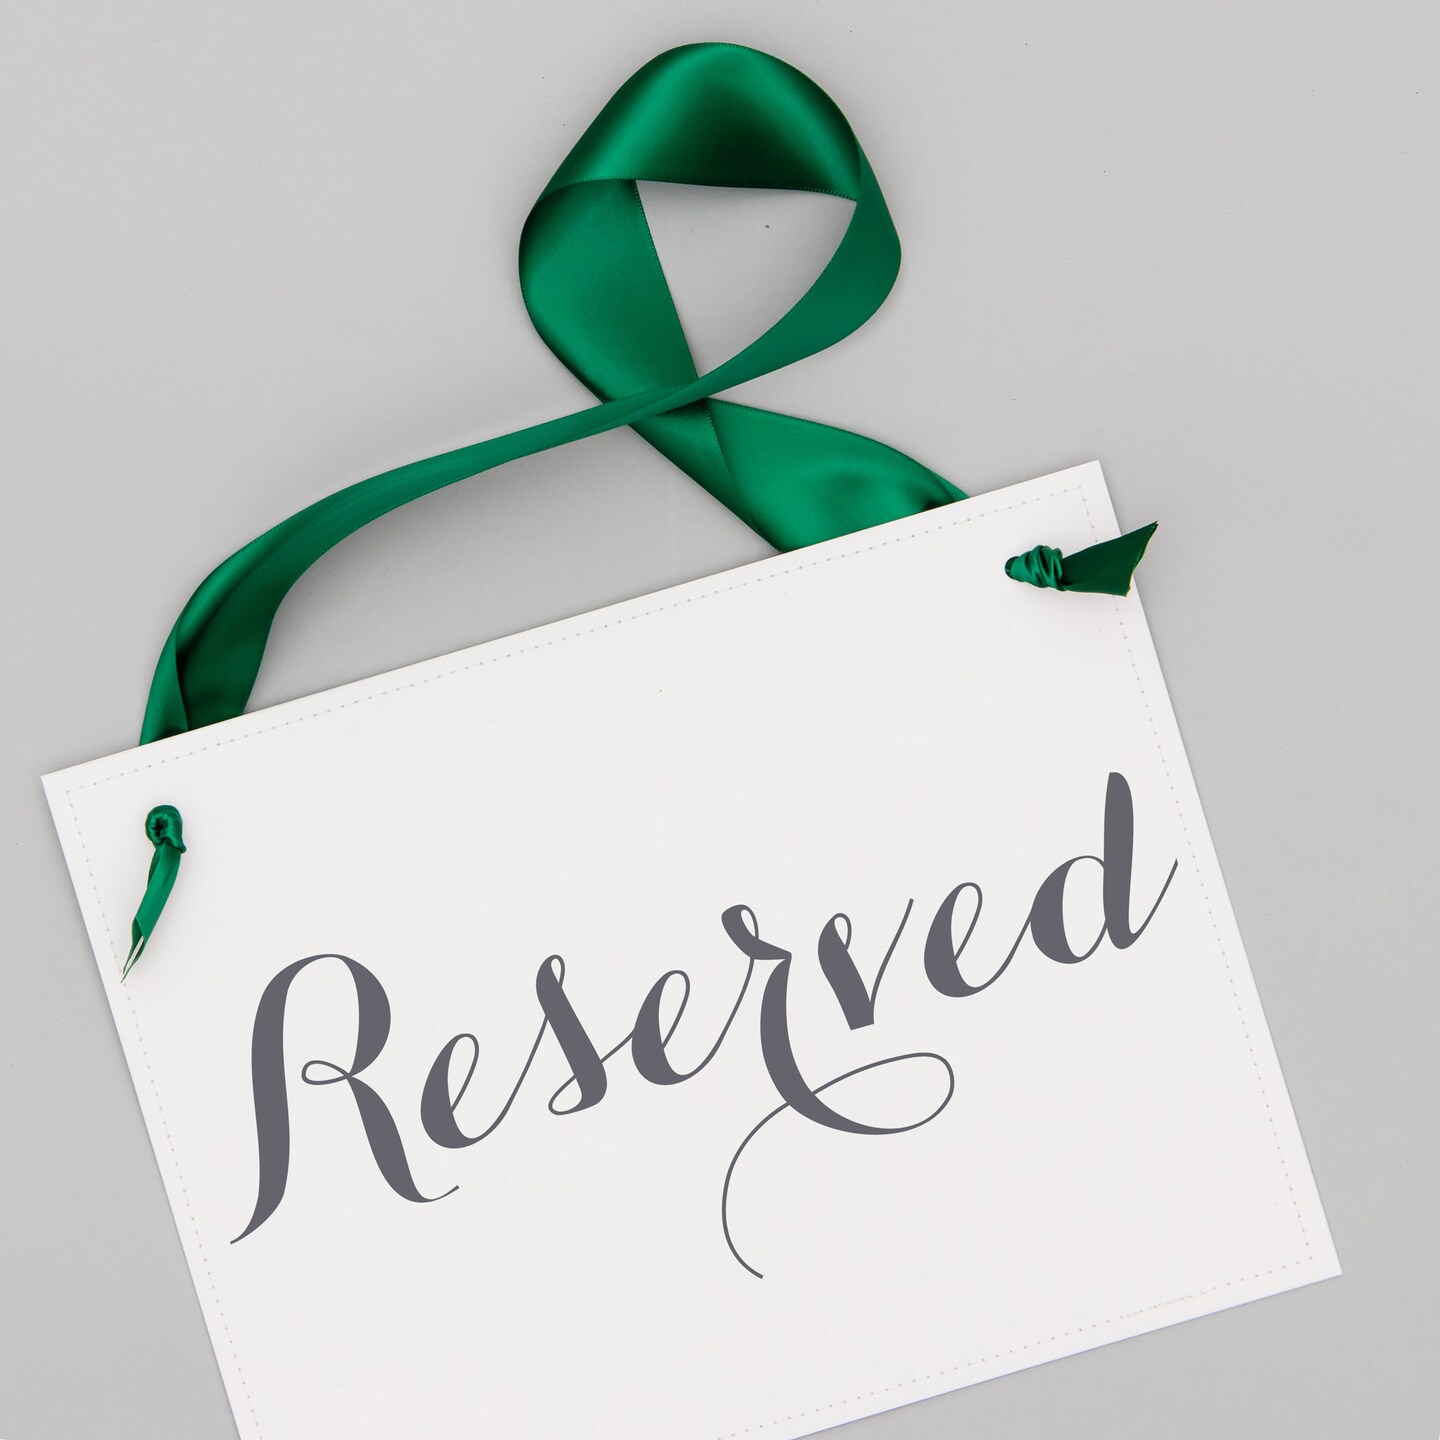 Ritzy Rose 2 Reserved Signs - Slate on 11x8in white Linen Cardstock with emerald green Ribbon